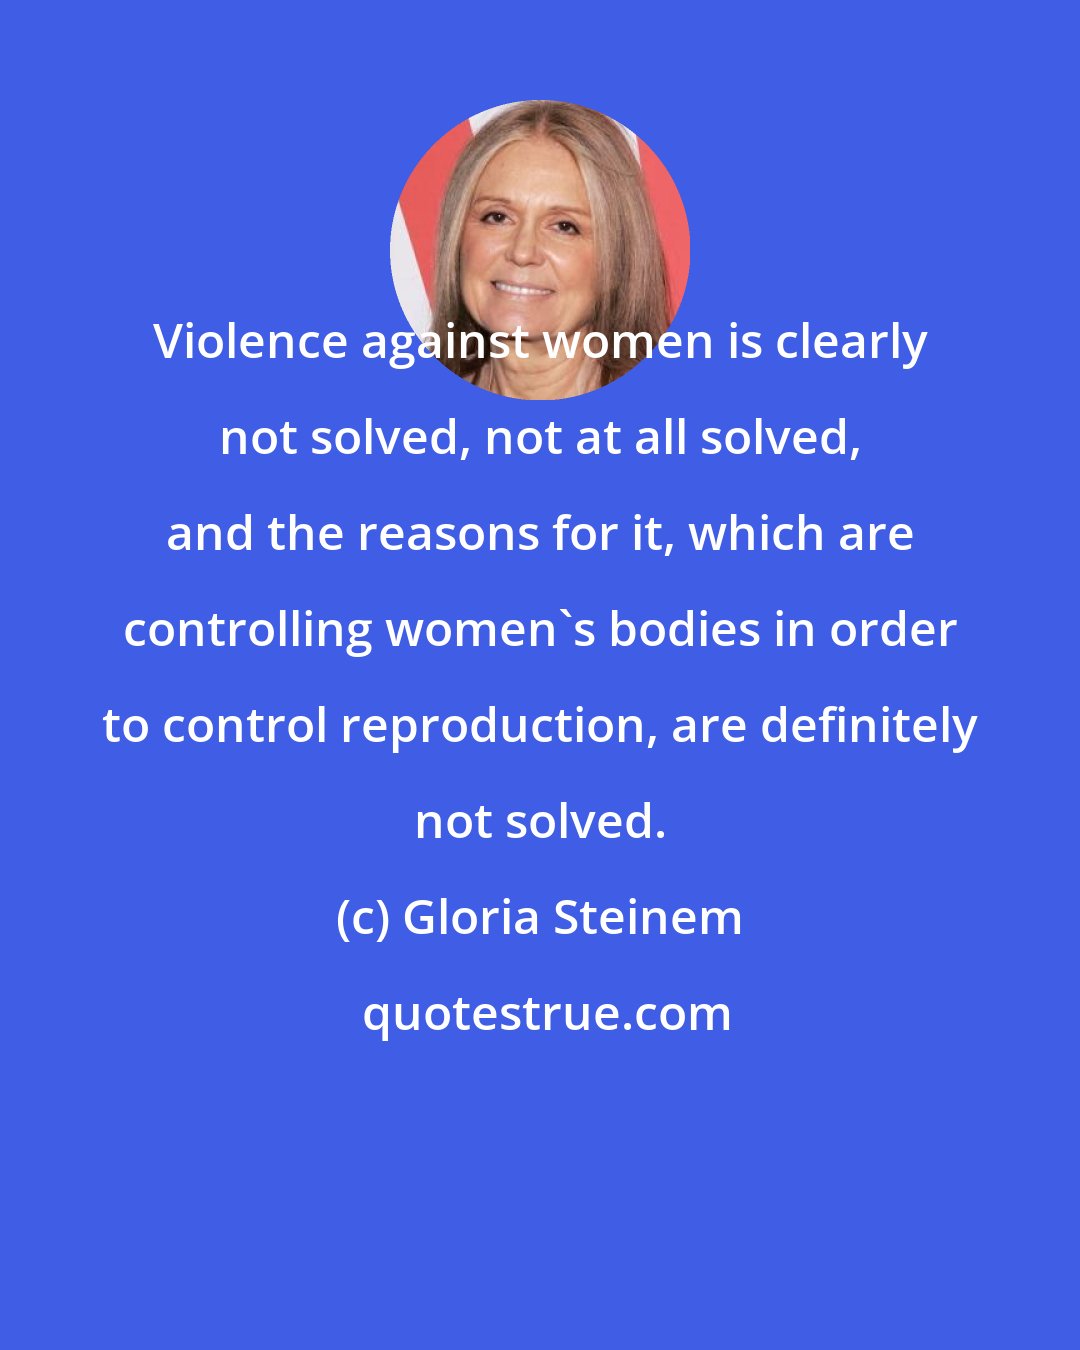 Gloria Steinem: Violence against women is clearly not solved, not at all solved, and the reasons for it, which are controlling women's bodies in order to control reproduction, are definitely not solved.